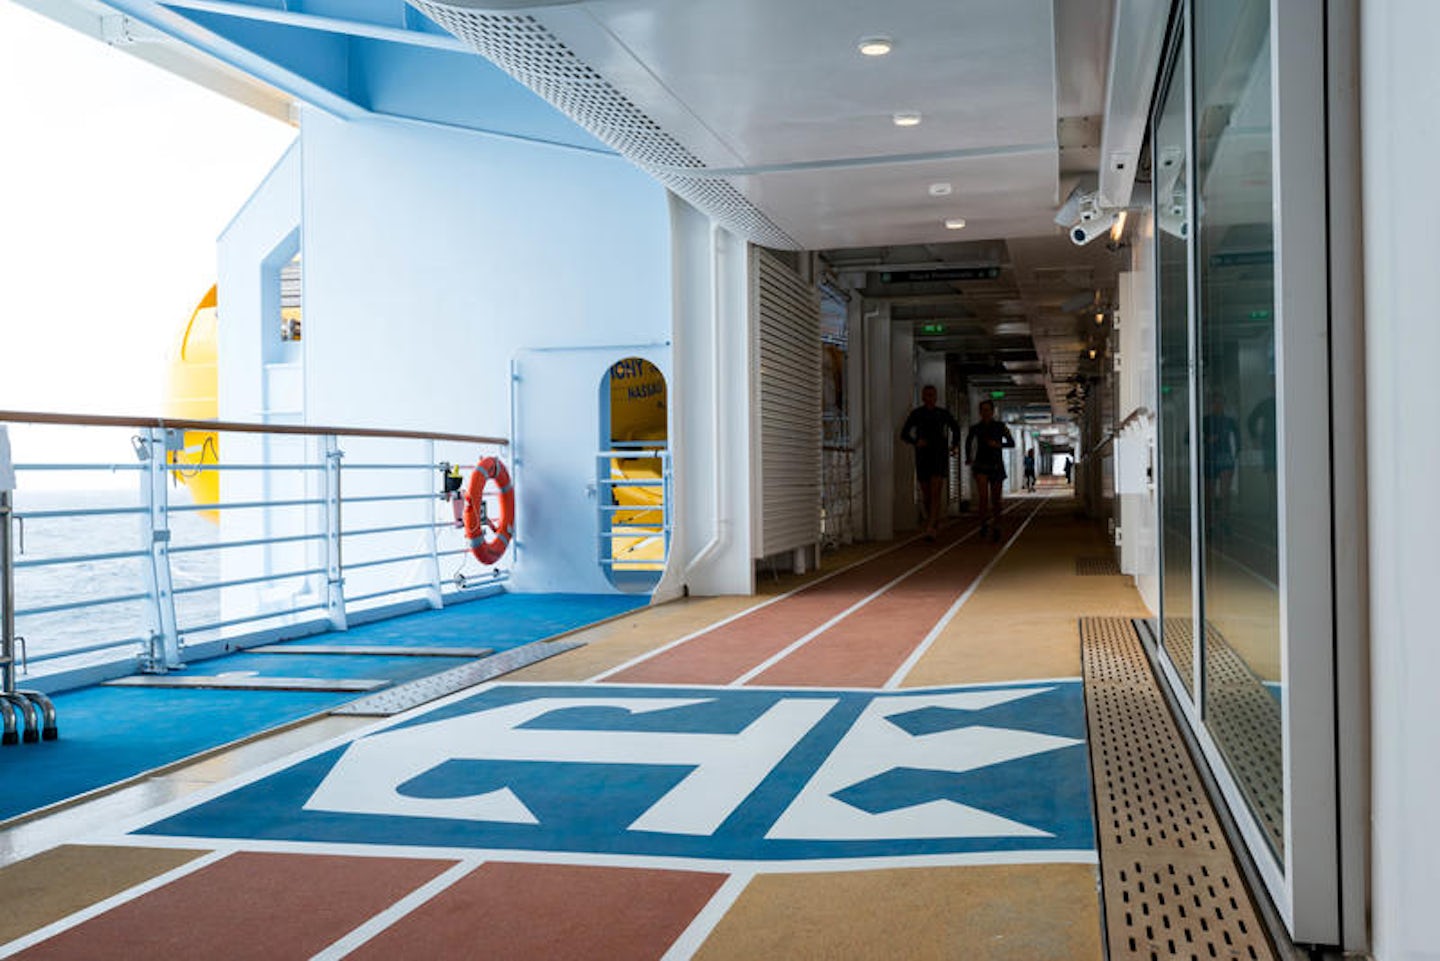 Running Track on Symphony of the Seas